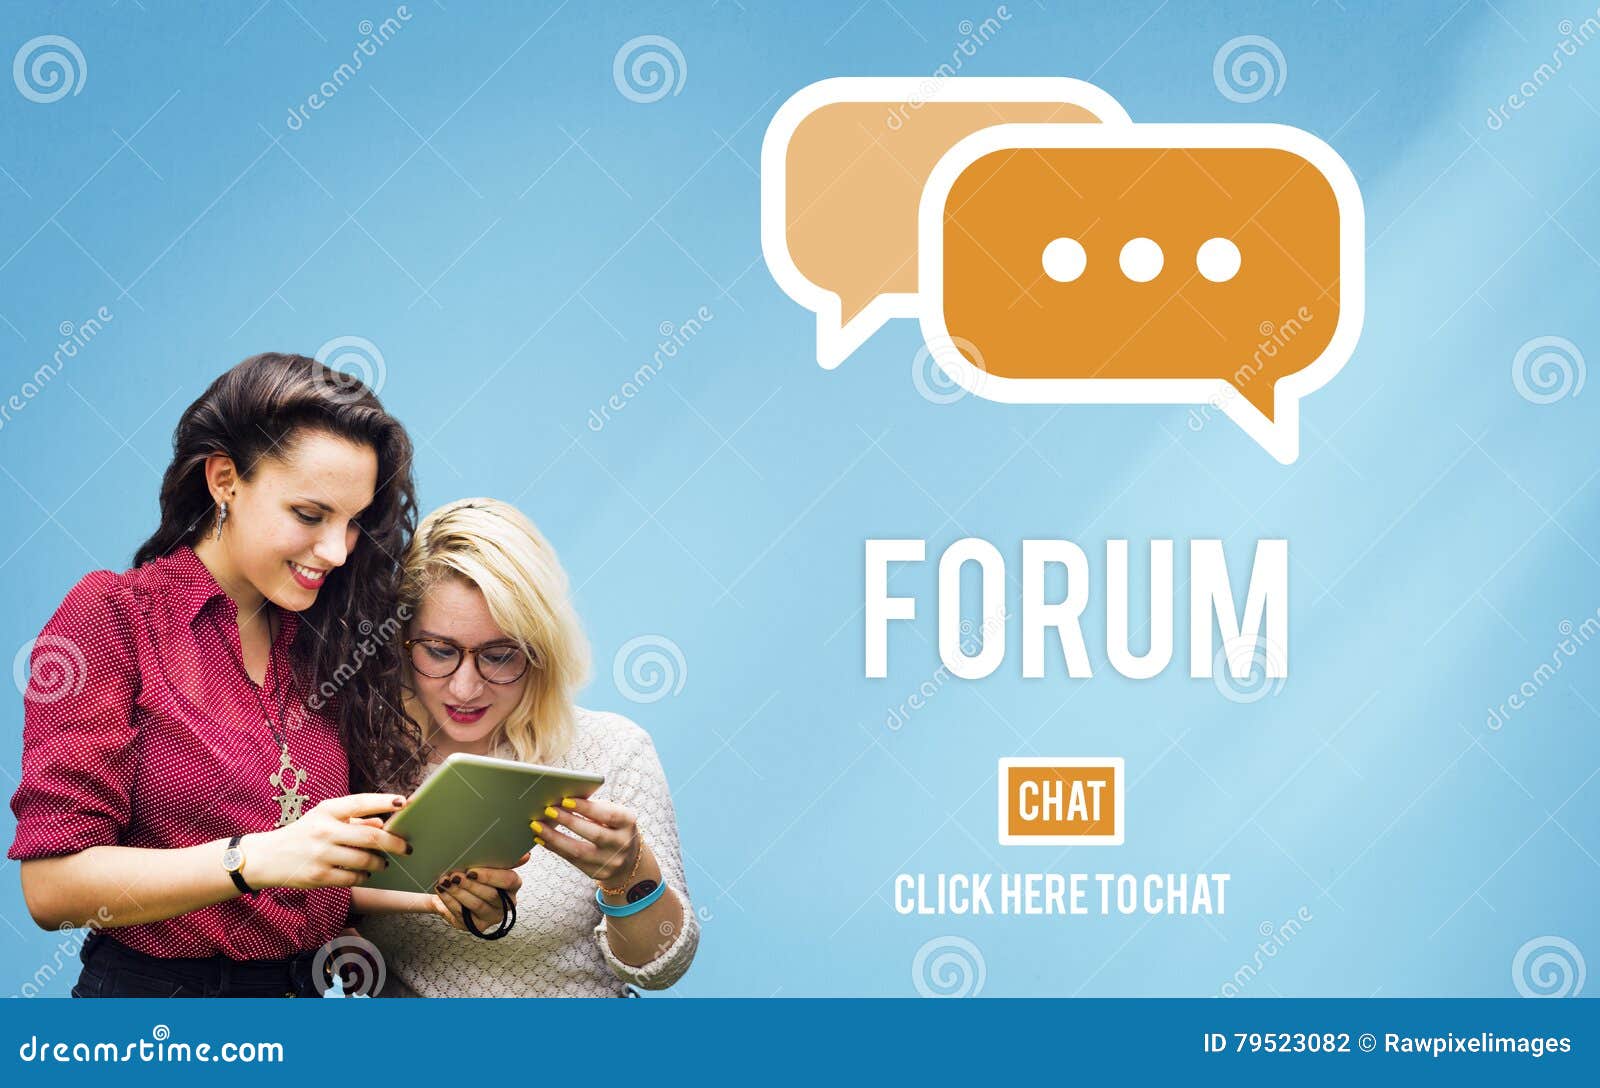 discuss forum chat group topic concept